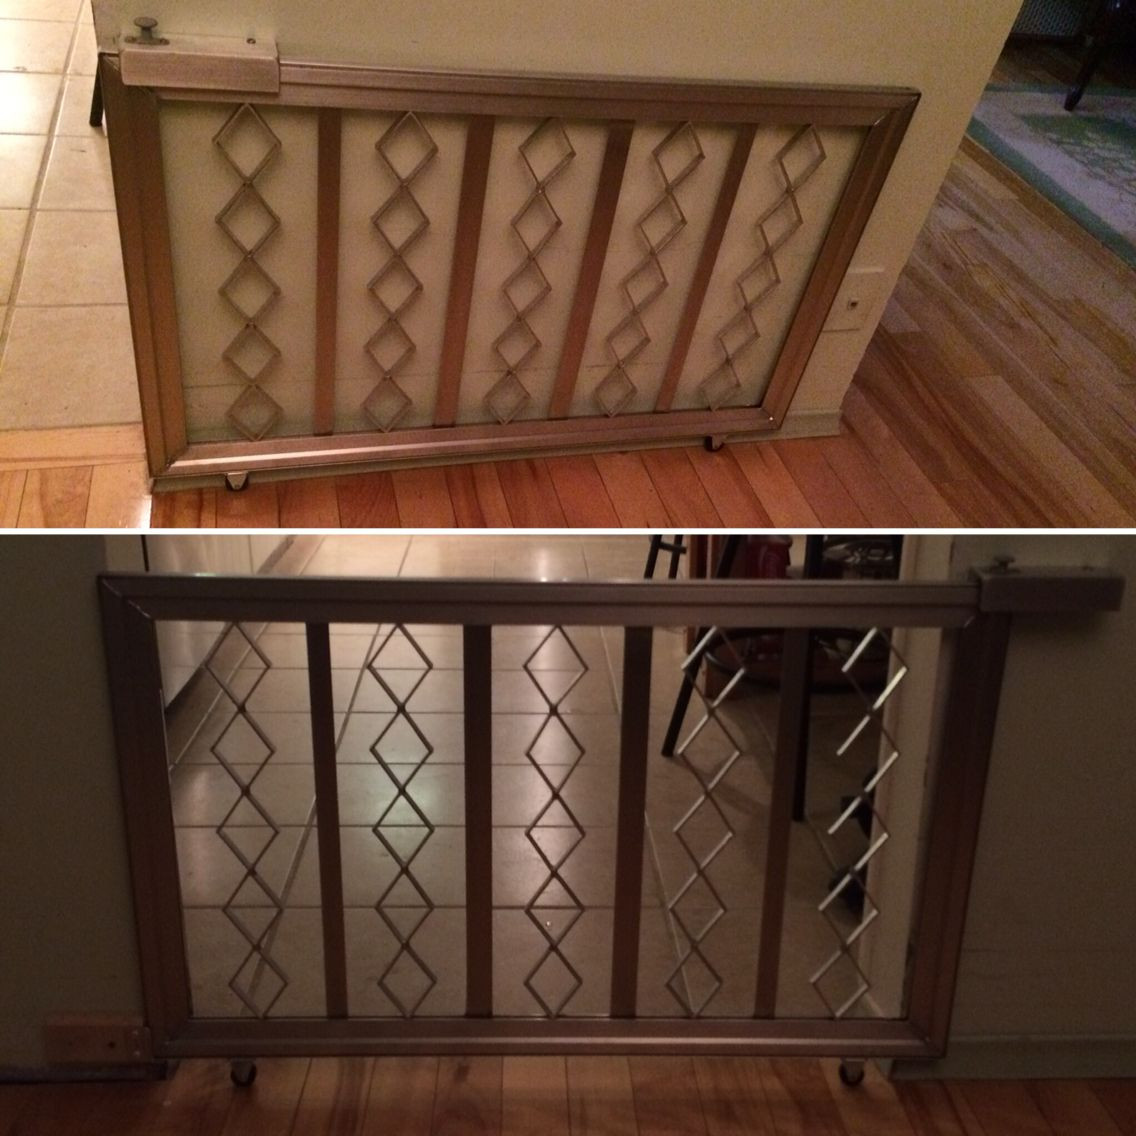 Sliding Dog Gate DIY
 Need something to keep the dogs out of the kitchen while I